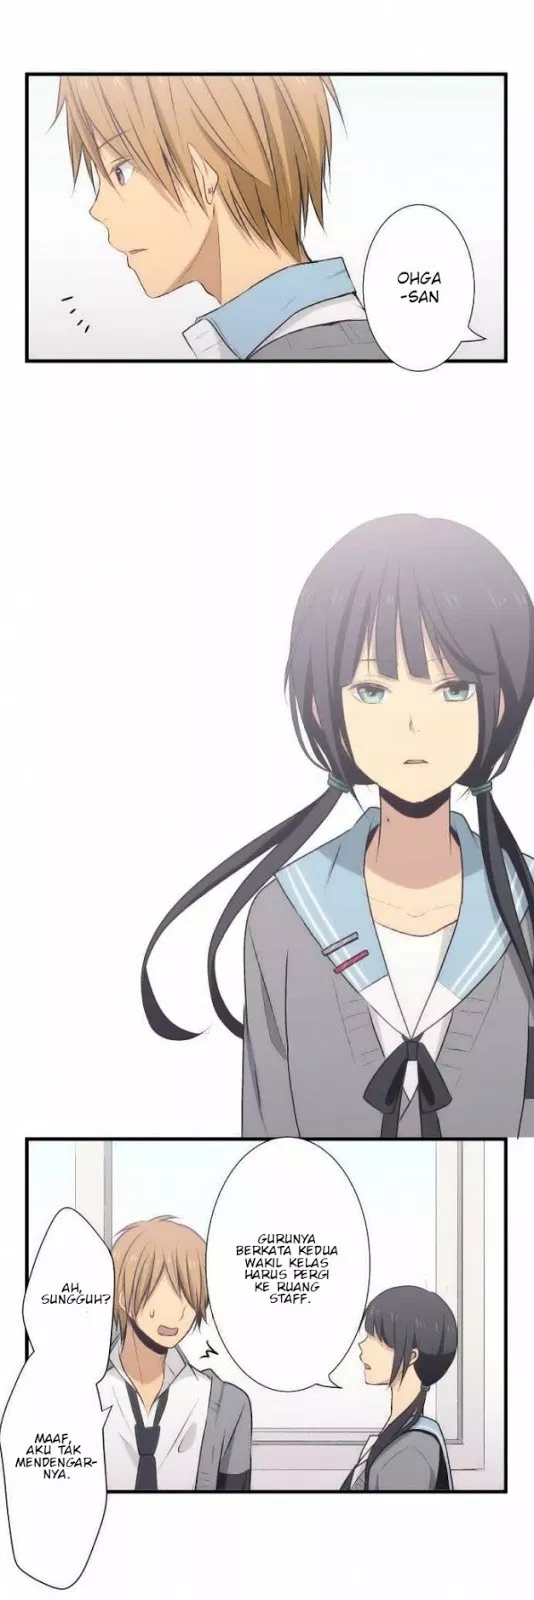 ReLIFE Chapter 26